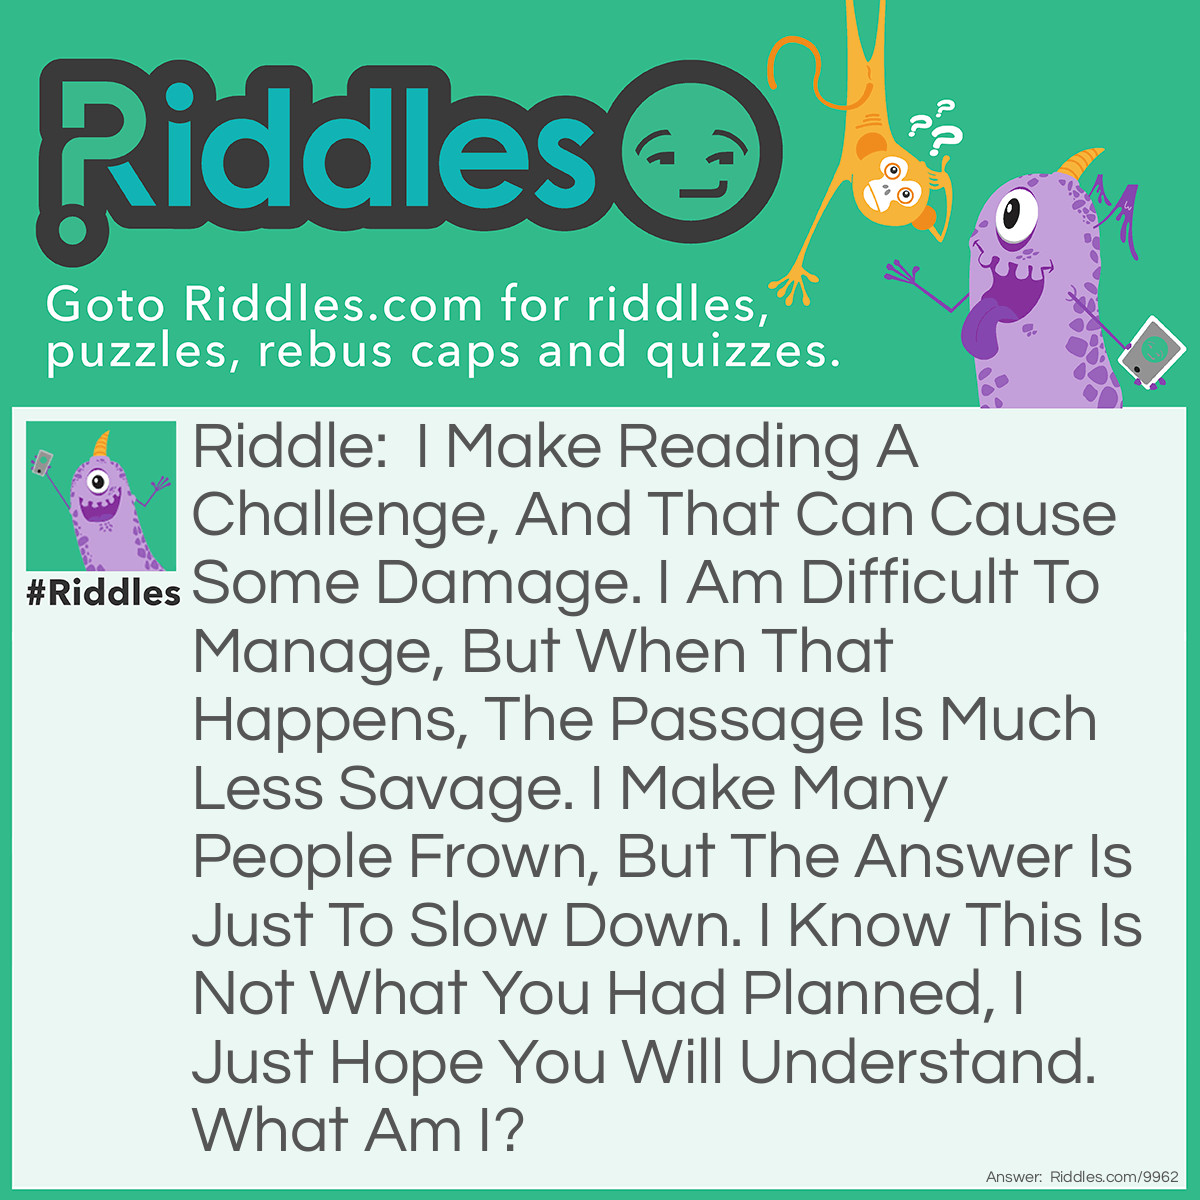 Riddle: I Make Reading A Challenge, And That Can Cause Some Damage. I Am <a href="/difficult-riddles">Difficult</a> To Manage, But When That Happens, The Passage Is Much Less Savage. I Make Many People Frown, But The Answer Is Just To Slow Down. I Know This Is Not What You Had Planned, I Just Hope You Will Understand. What Am I? Answer: I'm Dyslexia.